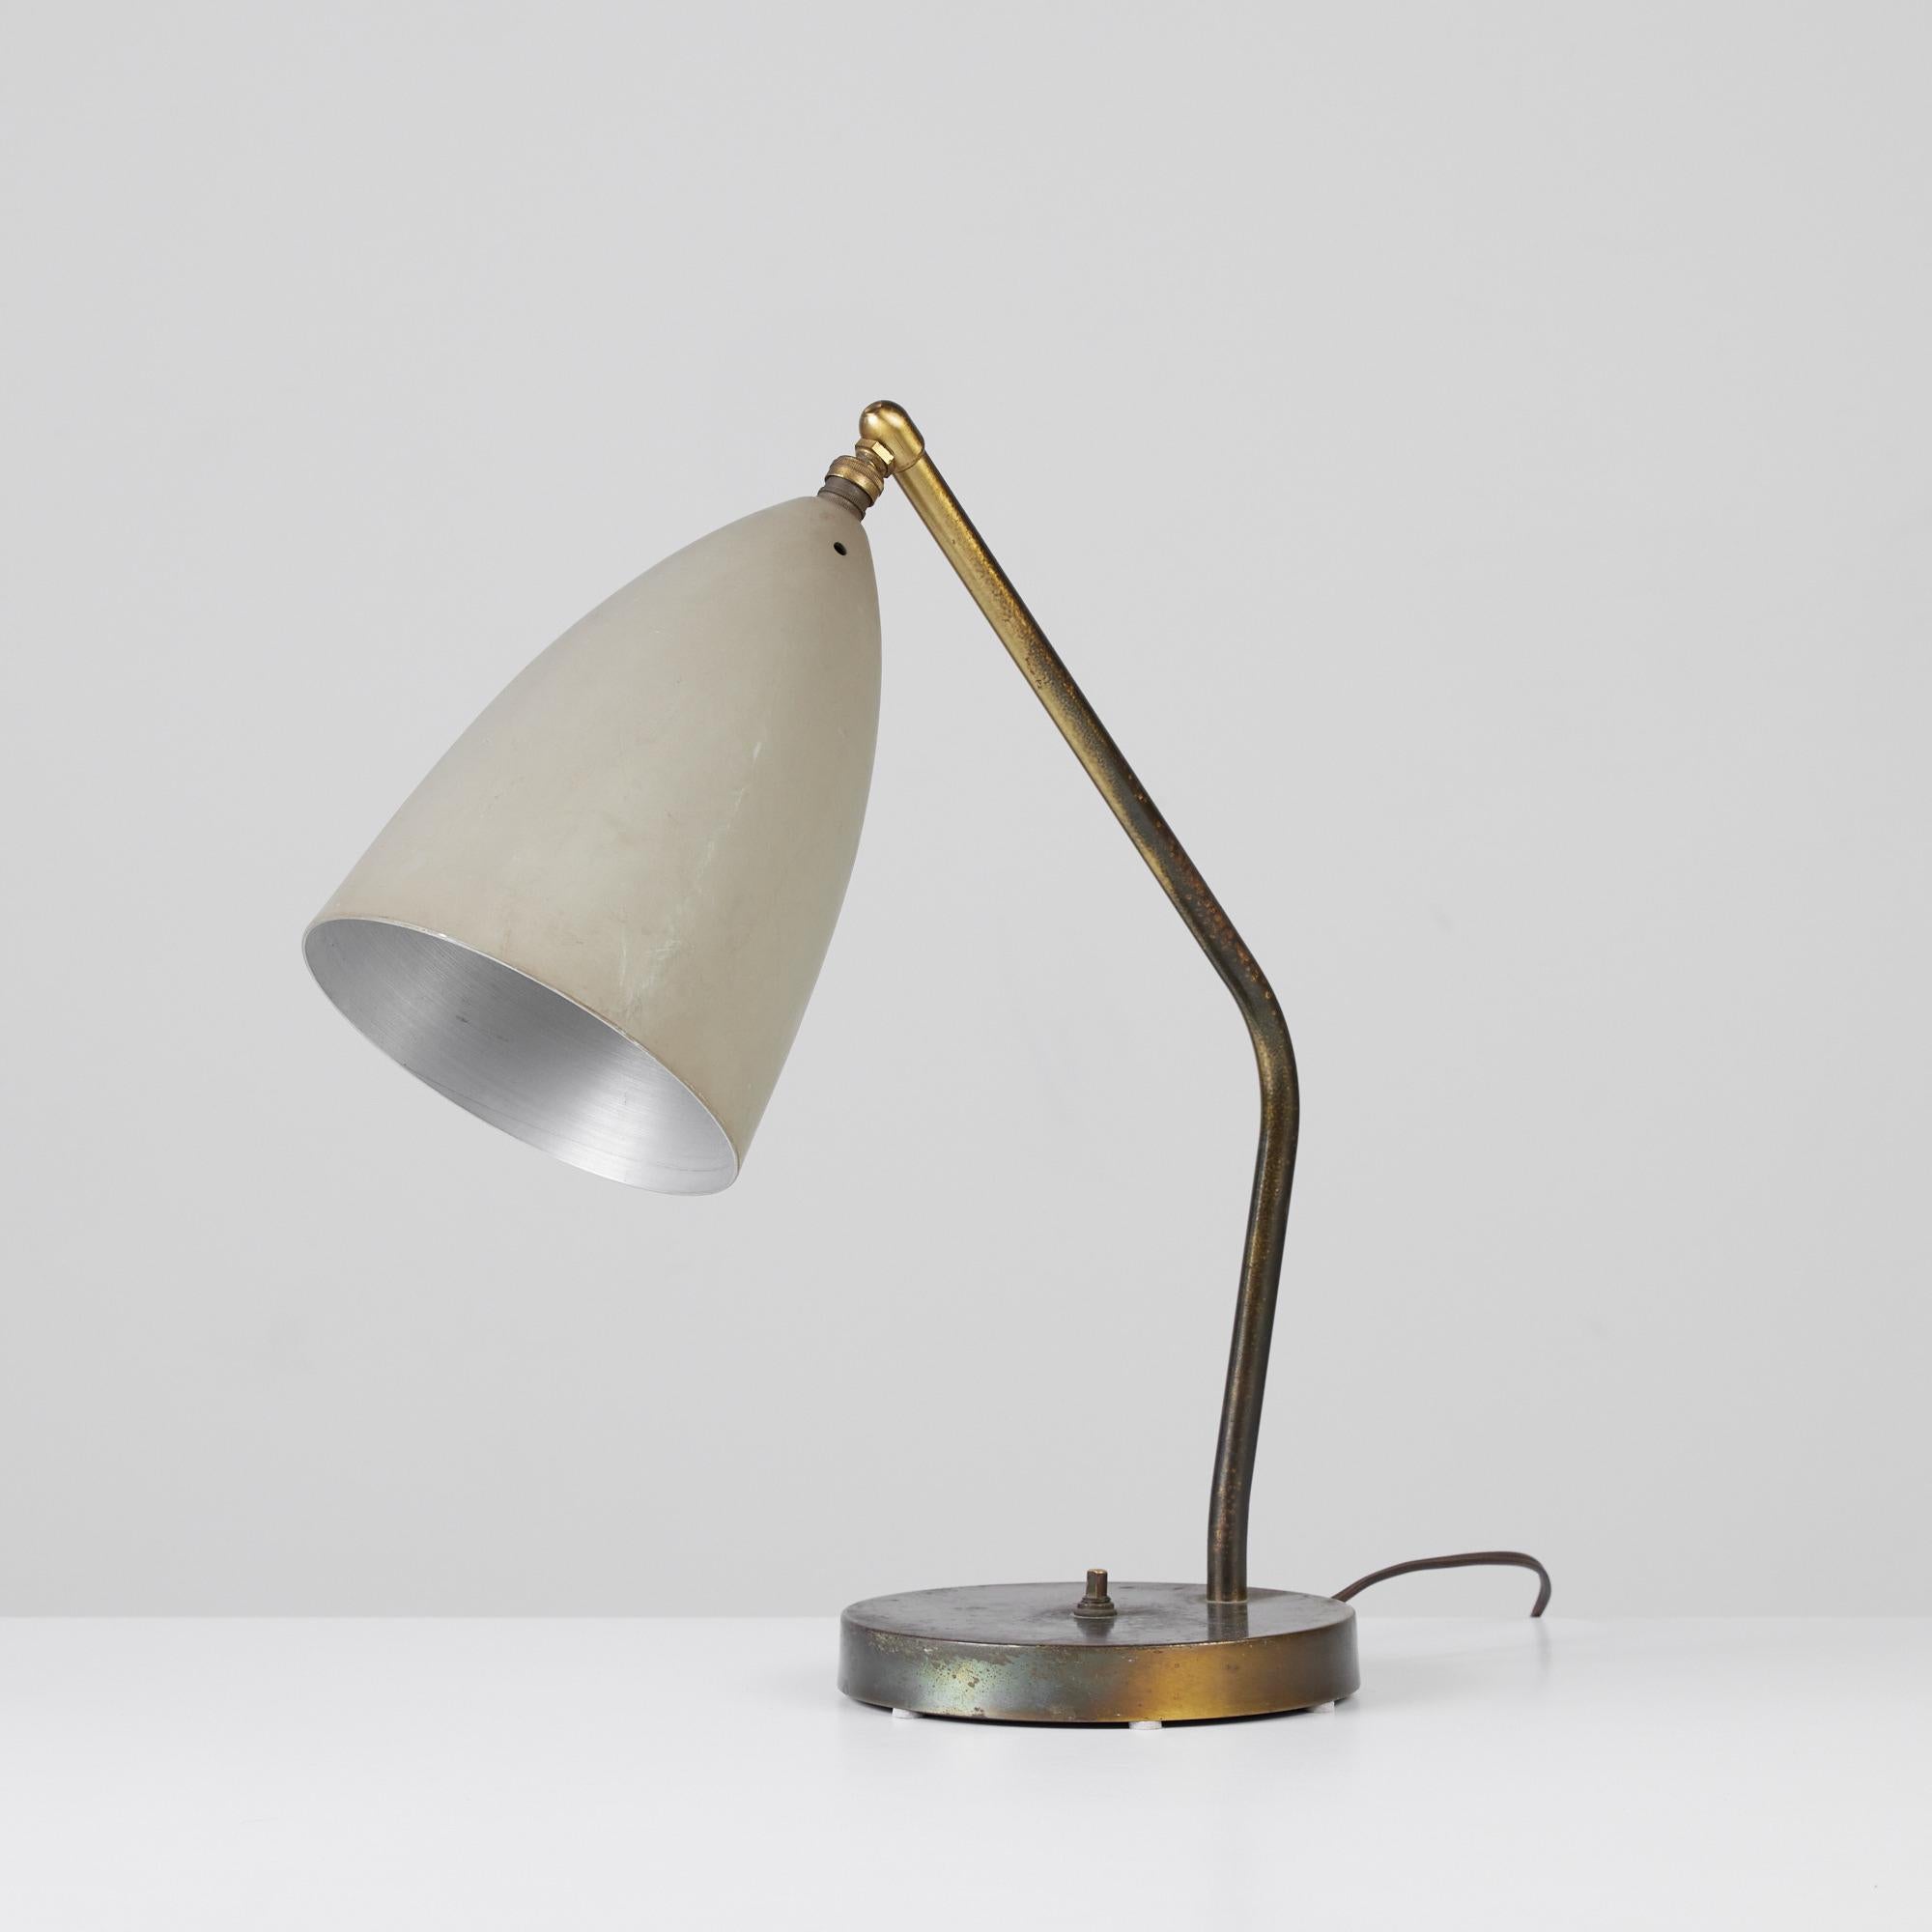 Designed by Swedish-American designer Greta Grossman for Ralph O. Smith, c.1950s, USA. The lamp, known as the grasshopper table lamp, offers a minimalist design with a patinated brass arm and base. The pebbled colored cone shaped spun aluminum shade